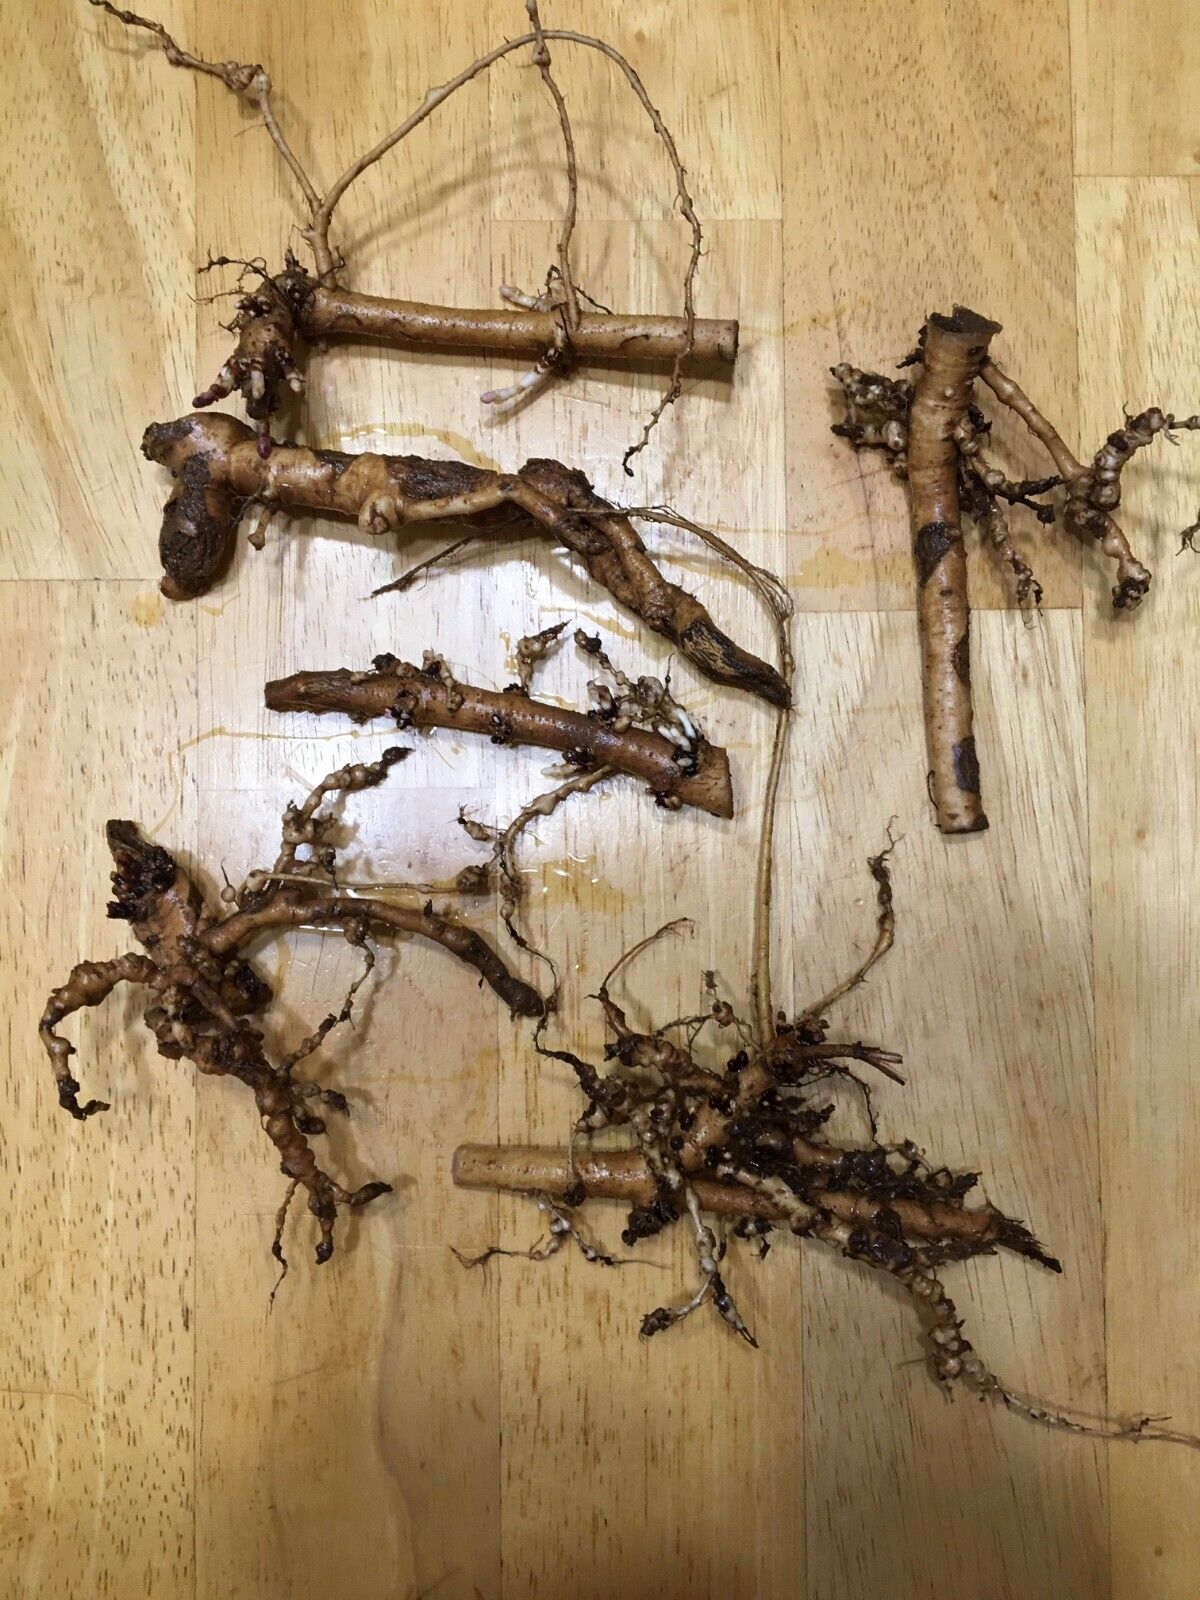 Ideal Mother\'s or Father\'s Day Gifts , 5 Organic Cascade Hop Rhizomes, $35.00